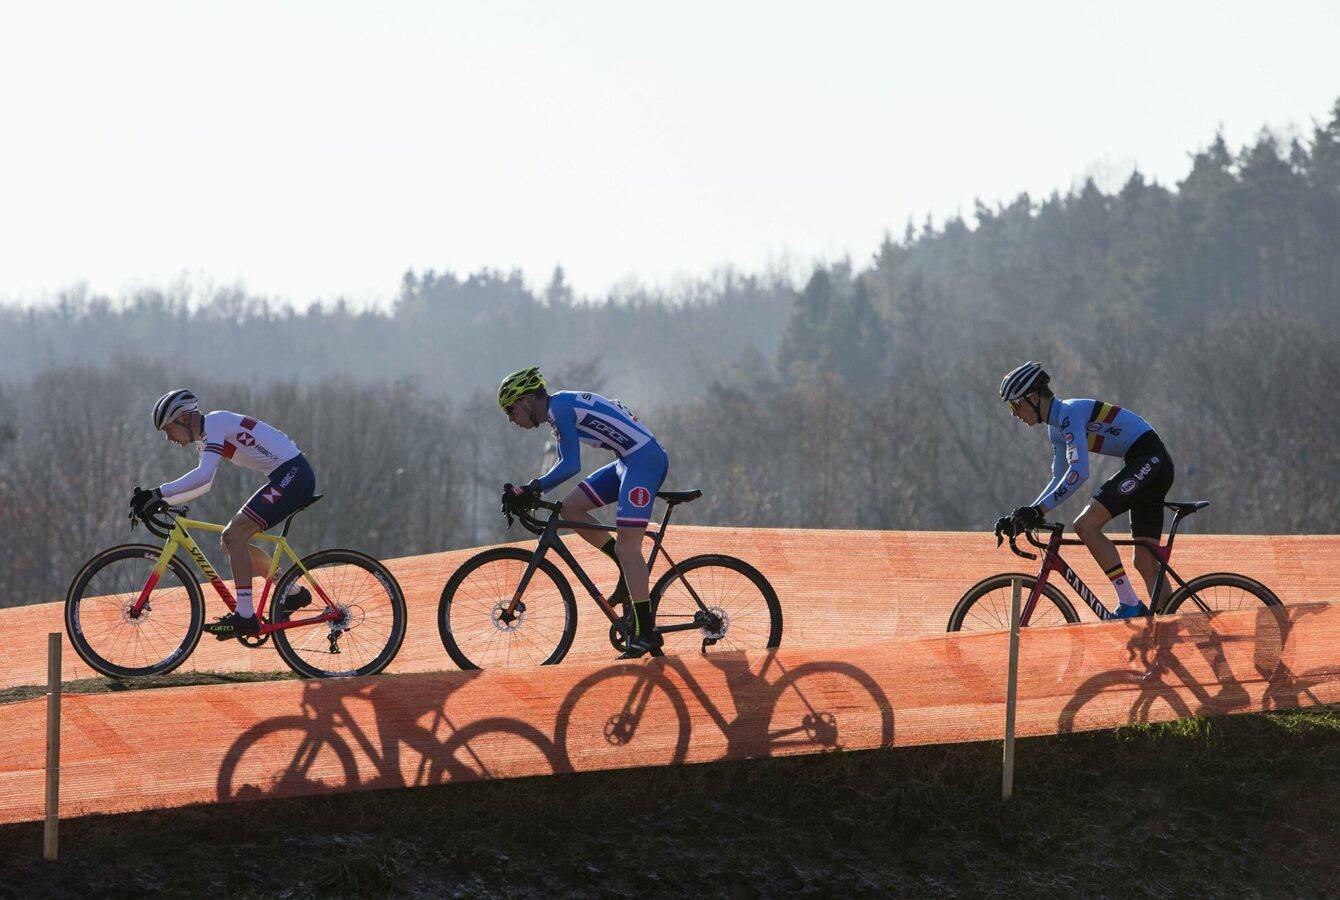 Val di Sole and Rucphen to complete 2021-2022 UCI Cyclo-cross World Cup calendar